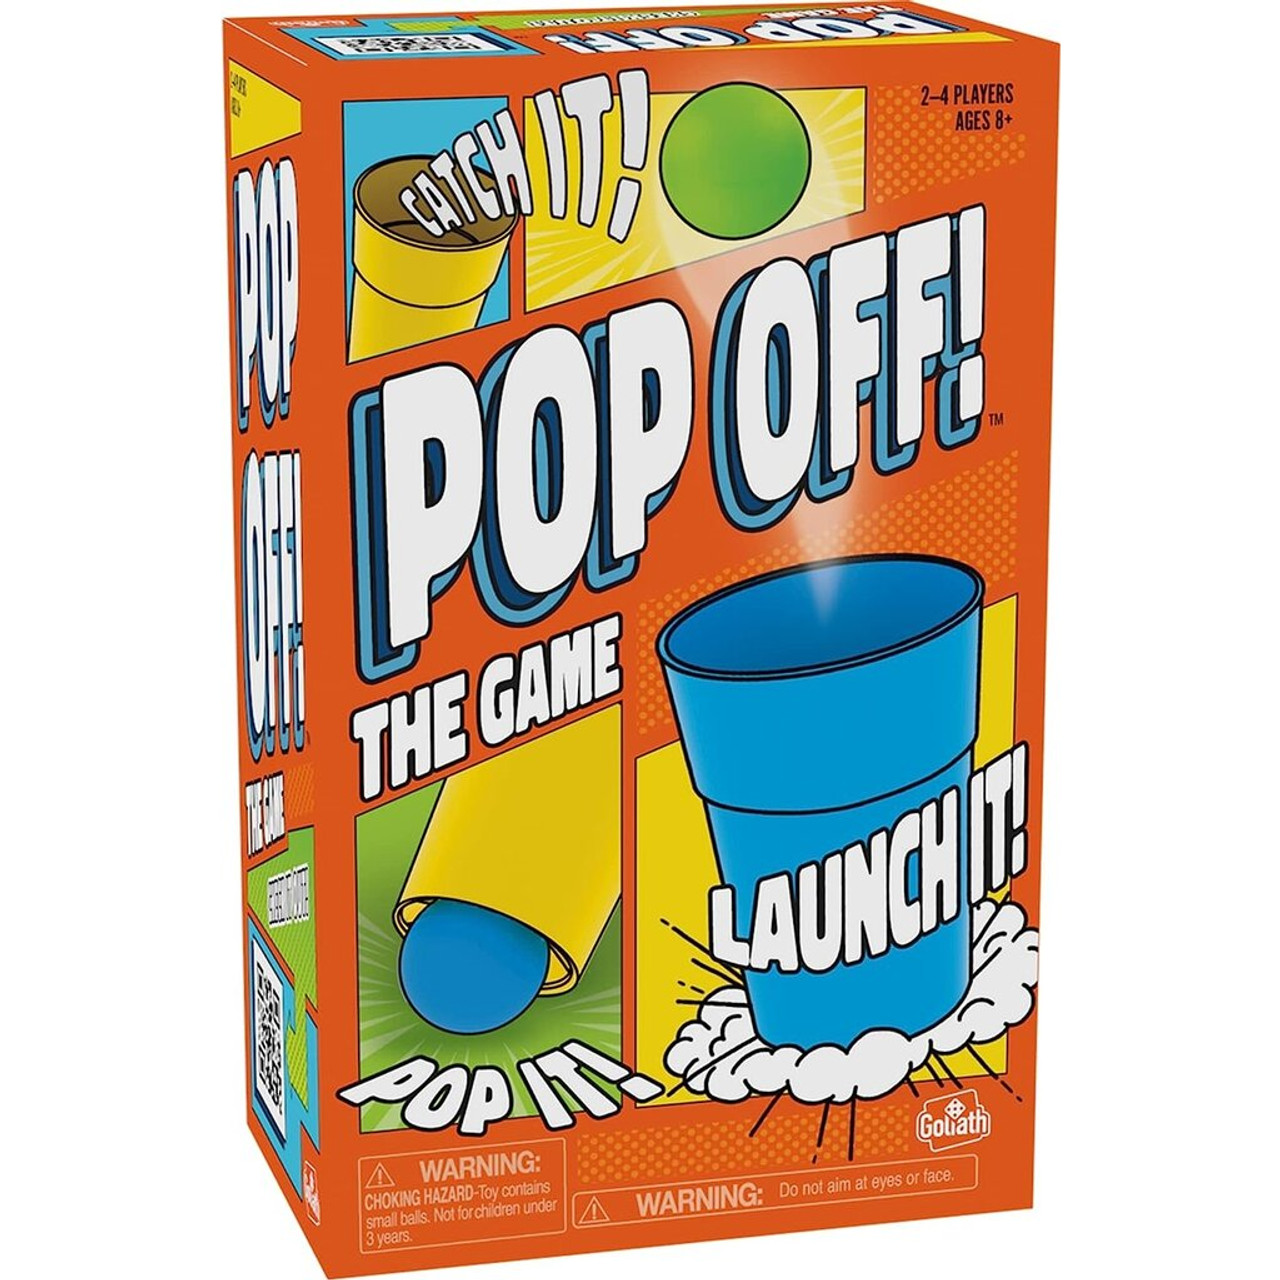 PUSH Card Game, Children's Games, Games, Products